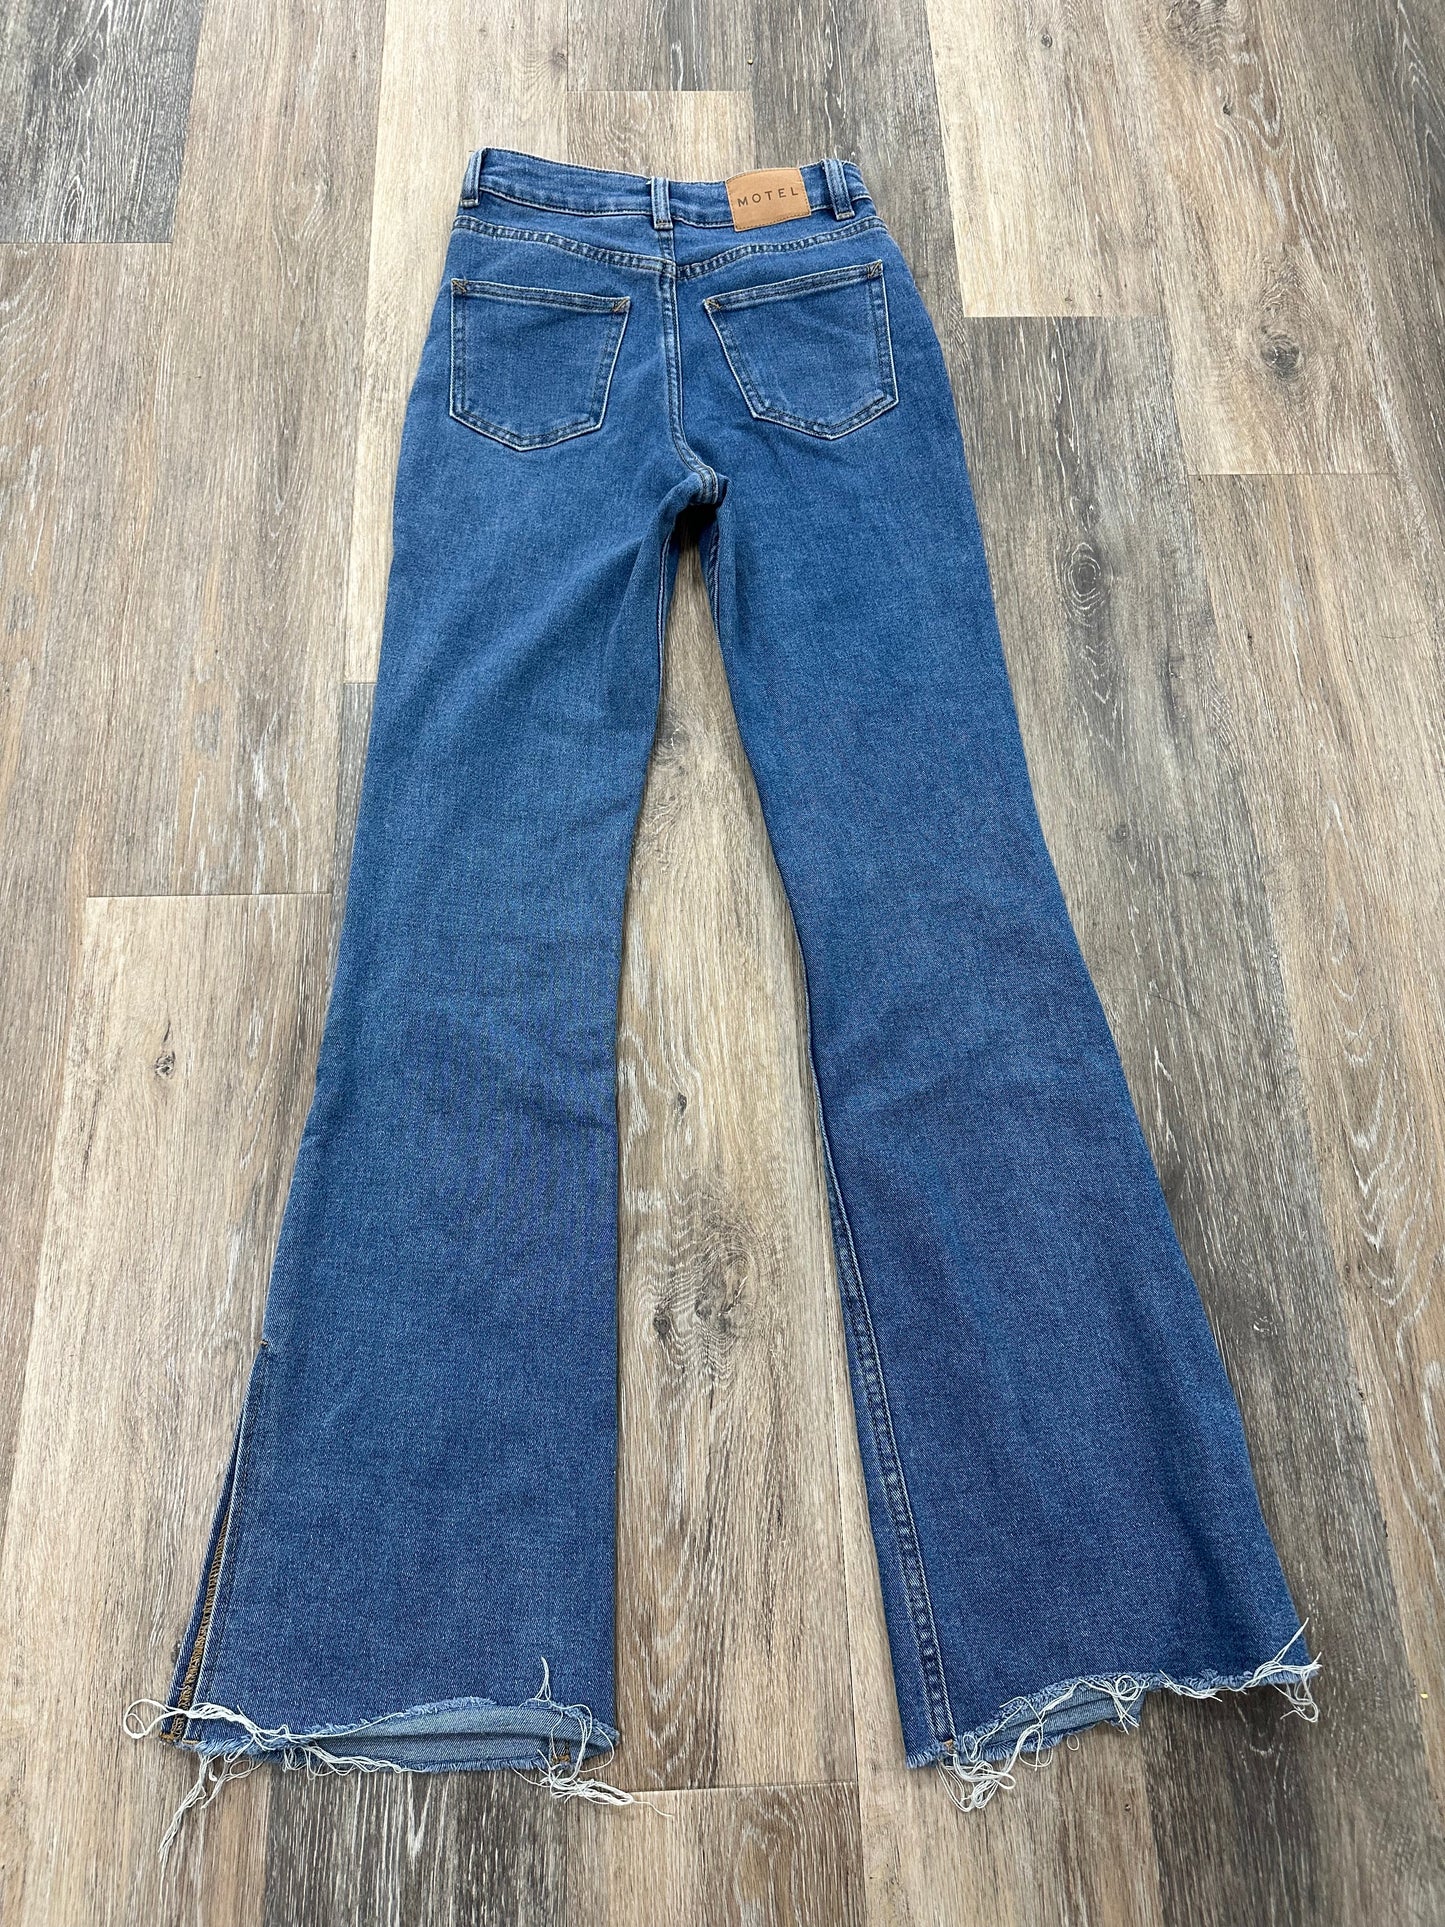 Jeans Boot Cut By Motel  Size: Xs